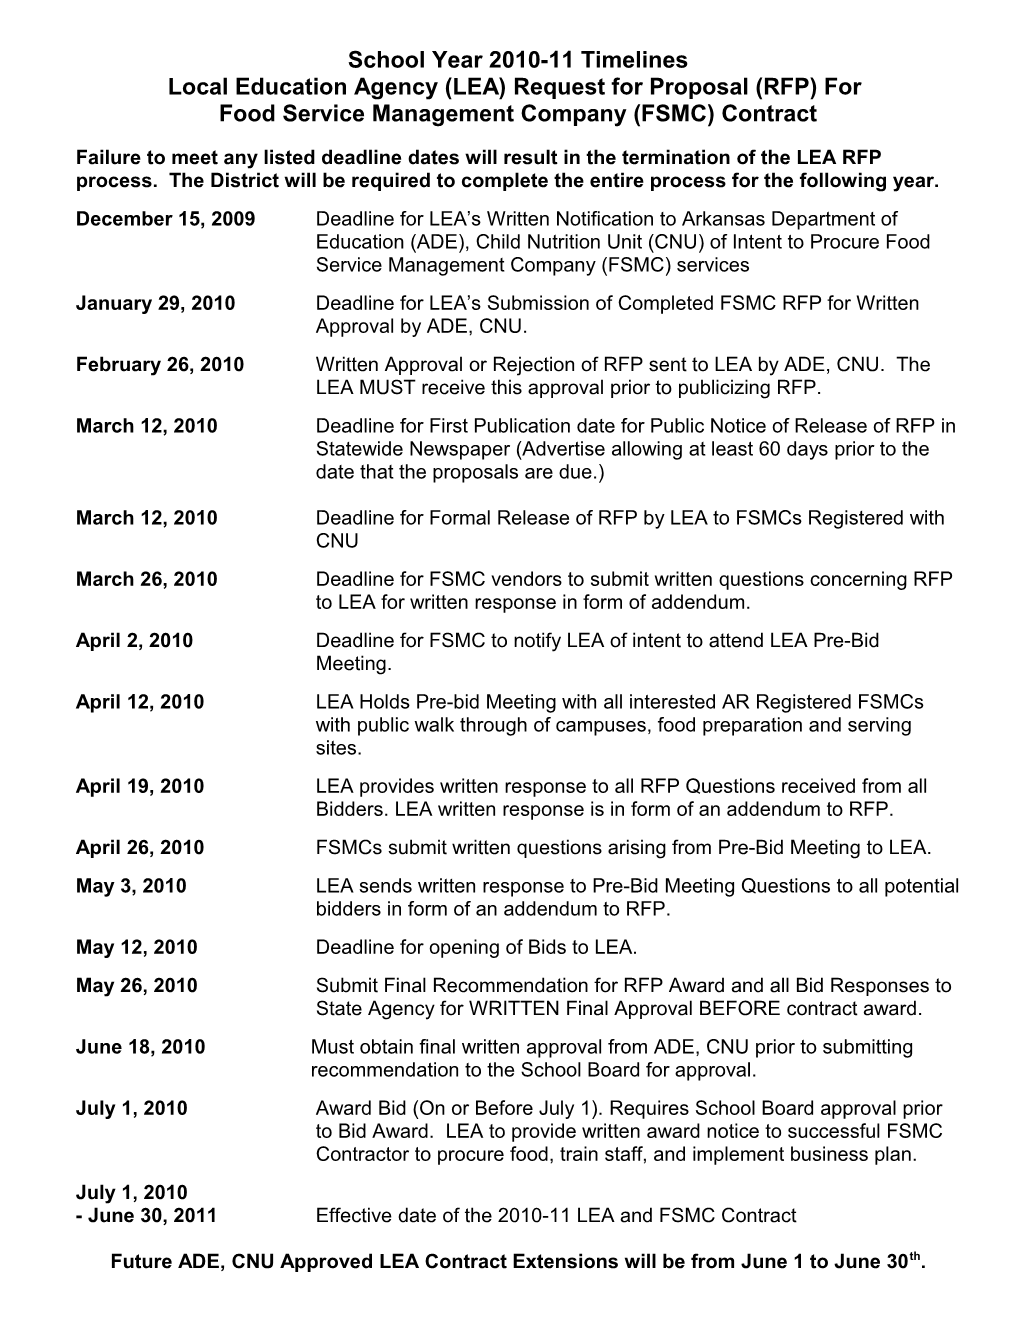 Timeline for Issuing a Request for Proposal (RFP)